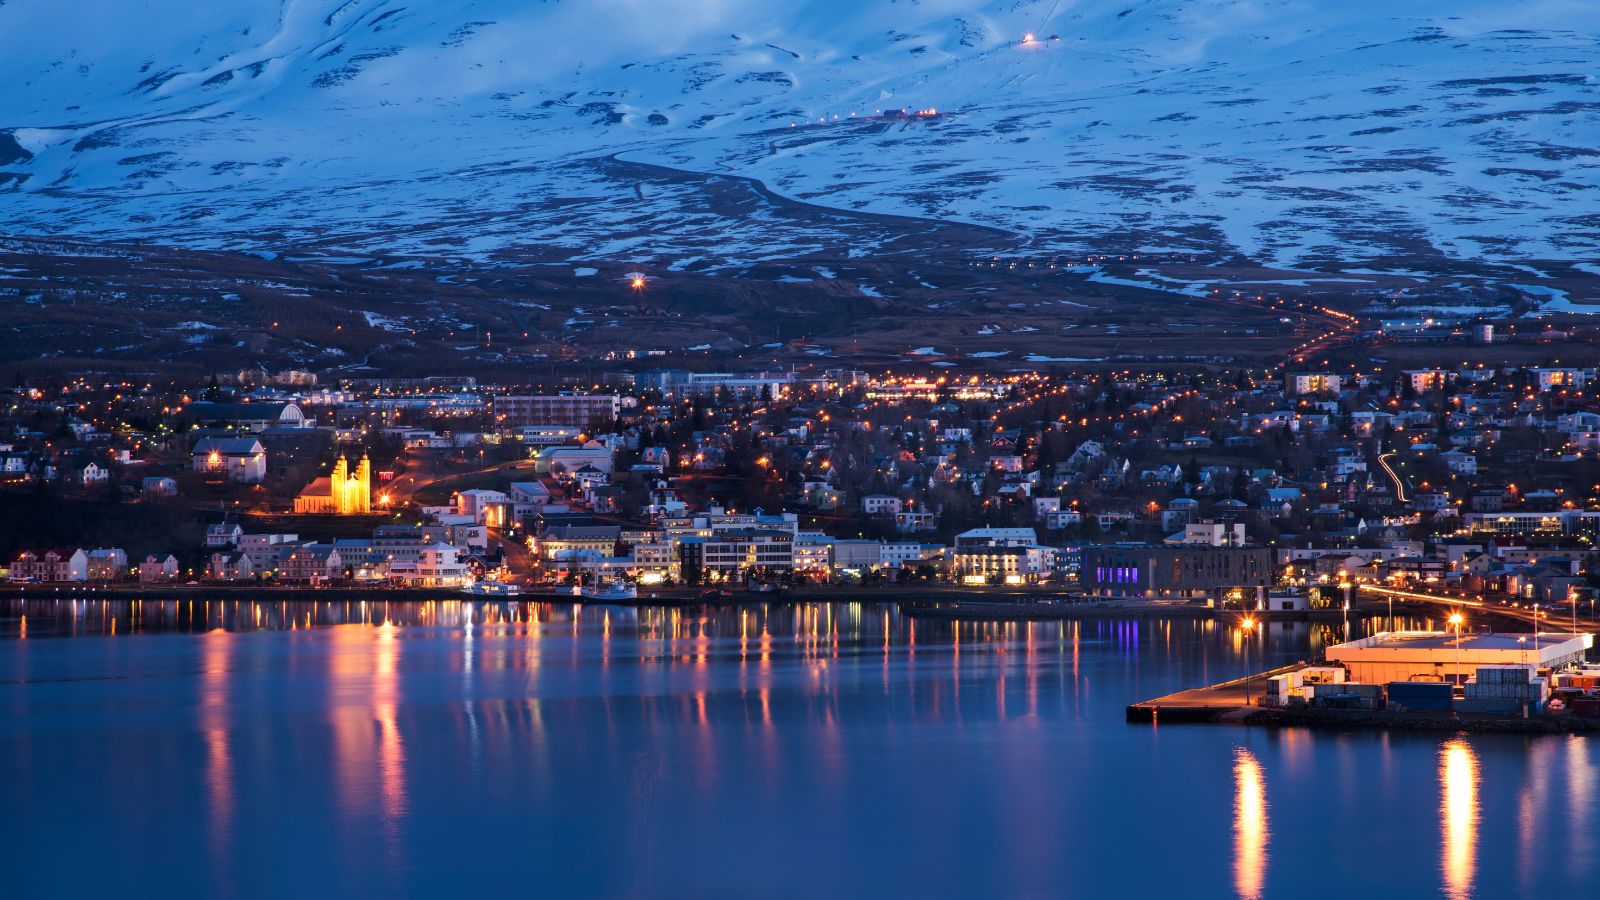 A late evening view of Akureyri across the fjord water overlooking the church, shopping streets, industrial docks, and private houses.